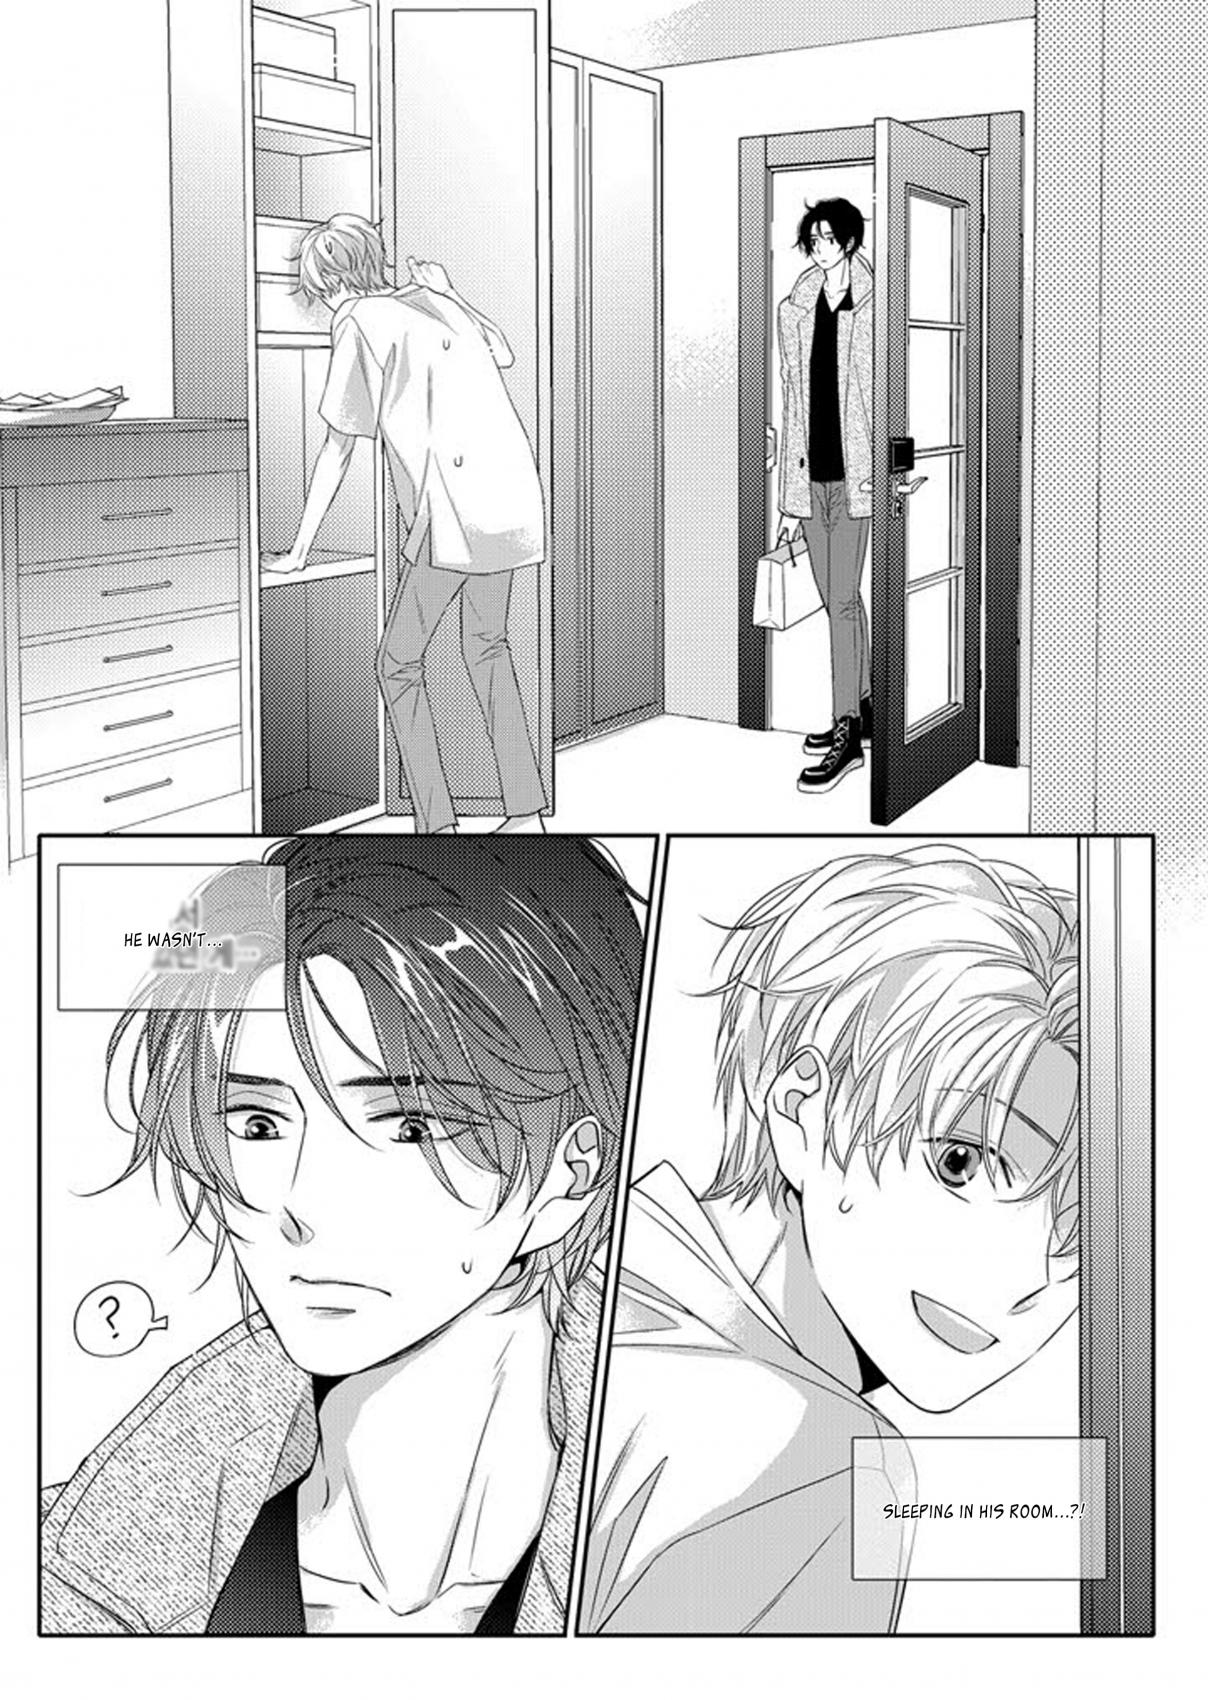 Unintentional Love Story Ch. 6